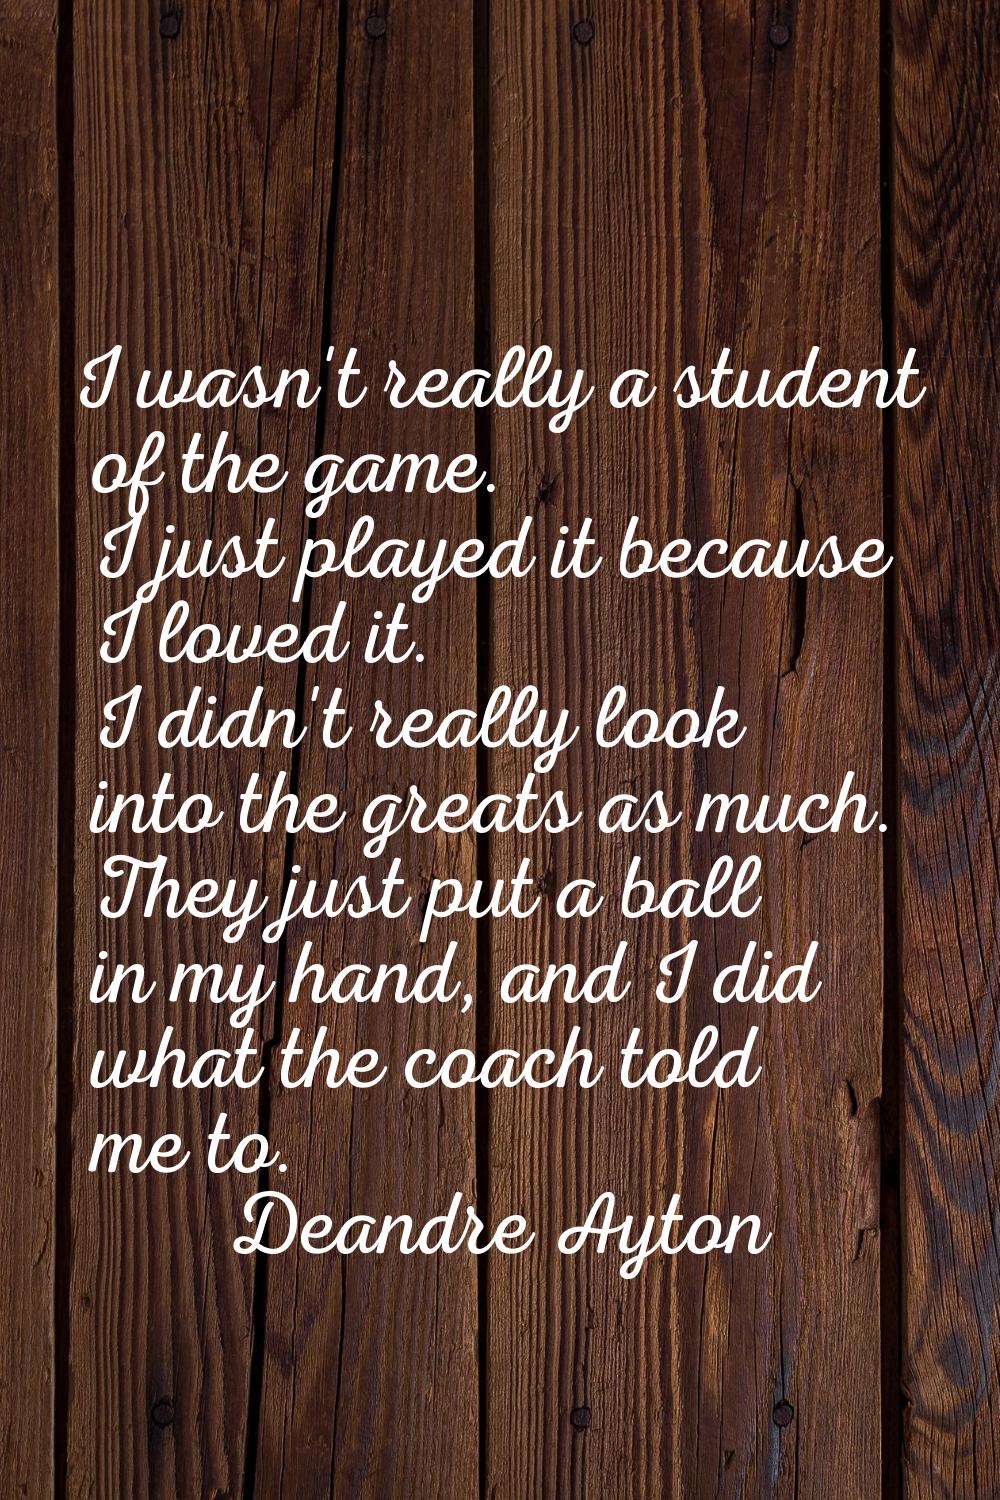 I wasn't really a student of the game. I just played it because I loved it. I didn't really look in